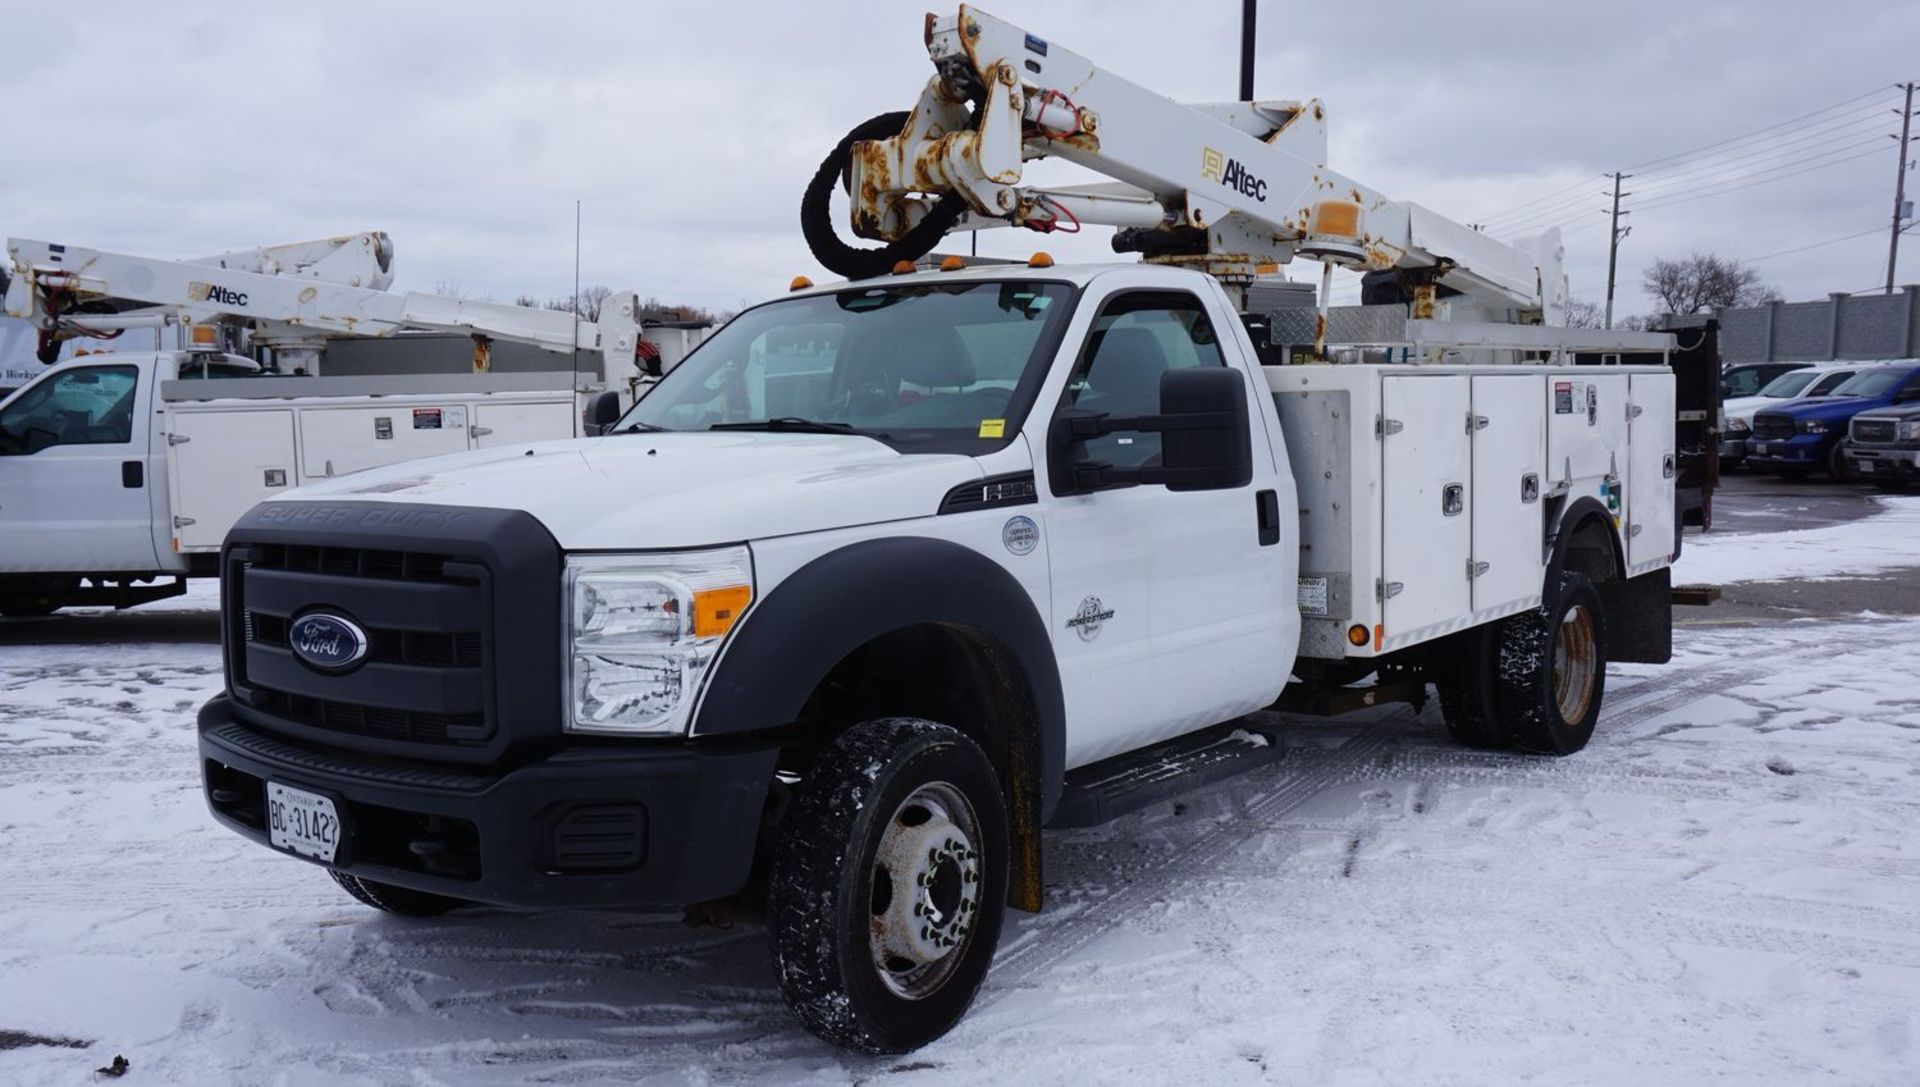 2015 ALTEC AT37G ARTICULATING TELESCOPIC BOOM & BUCKET MOUNTED ON 2015 FORD F550XL SUPER DUTY TRUCK